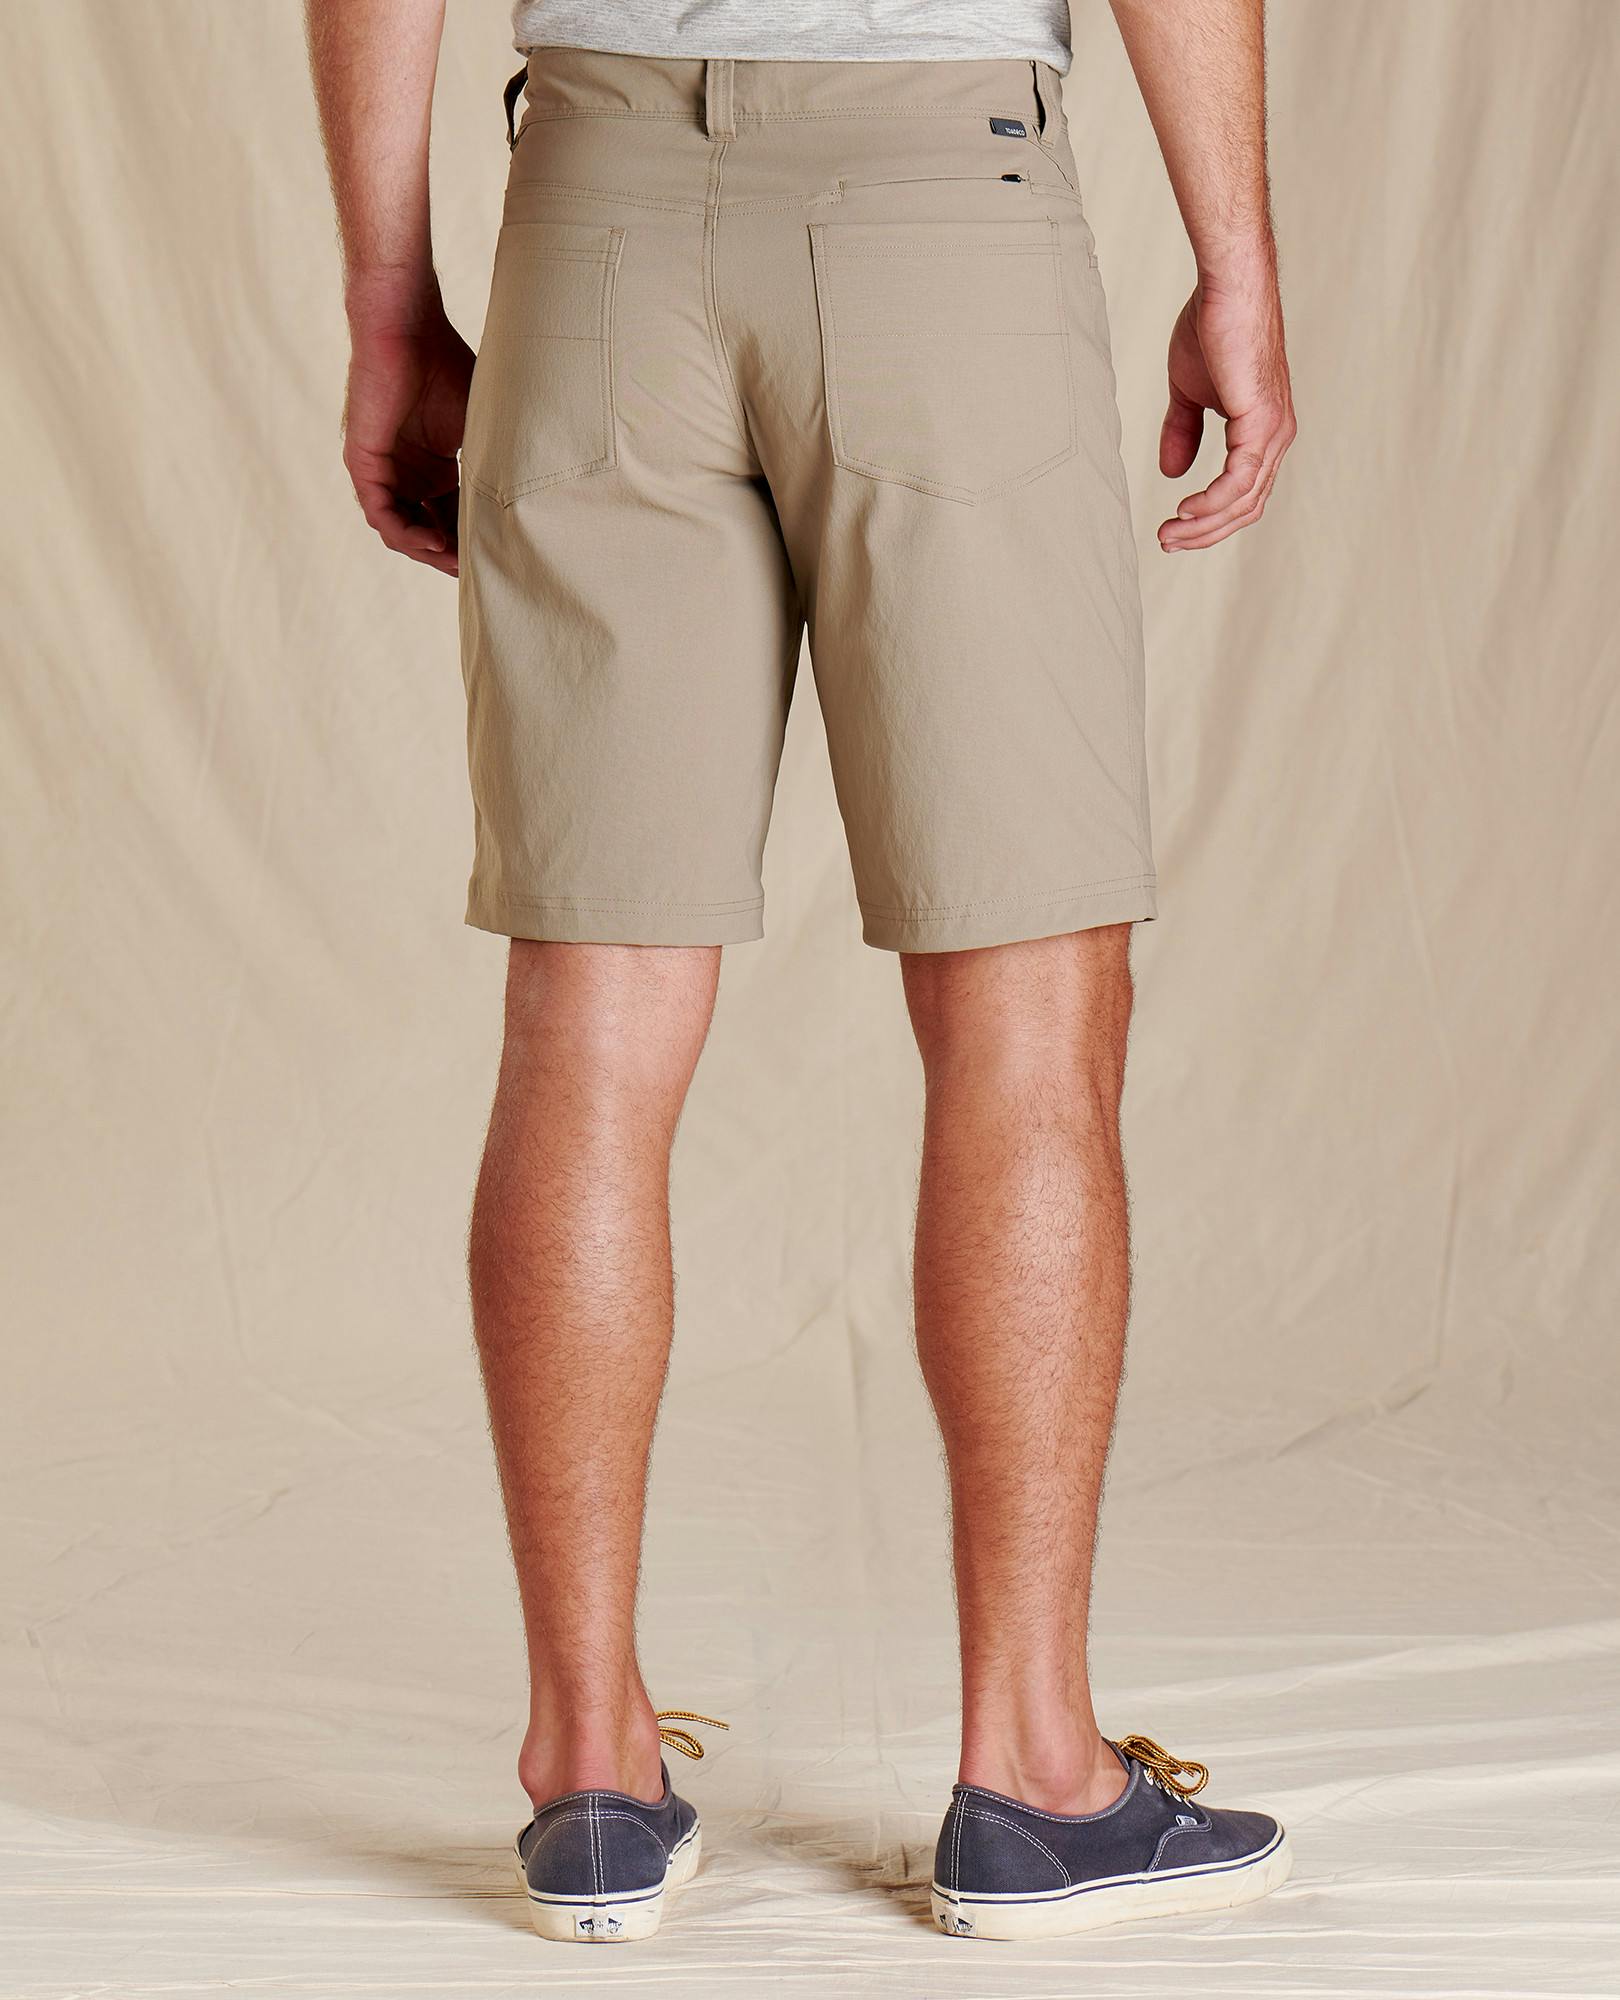 Toad&Co - Men's Rover Canvas Shorts